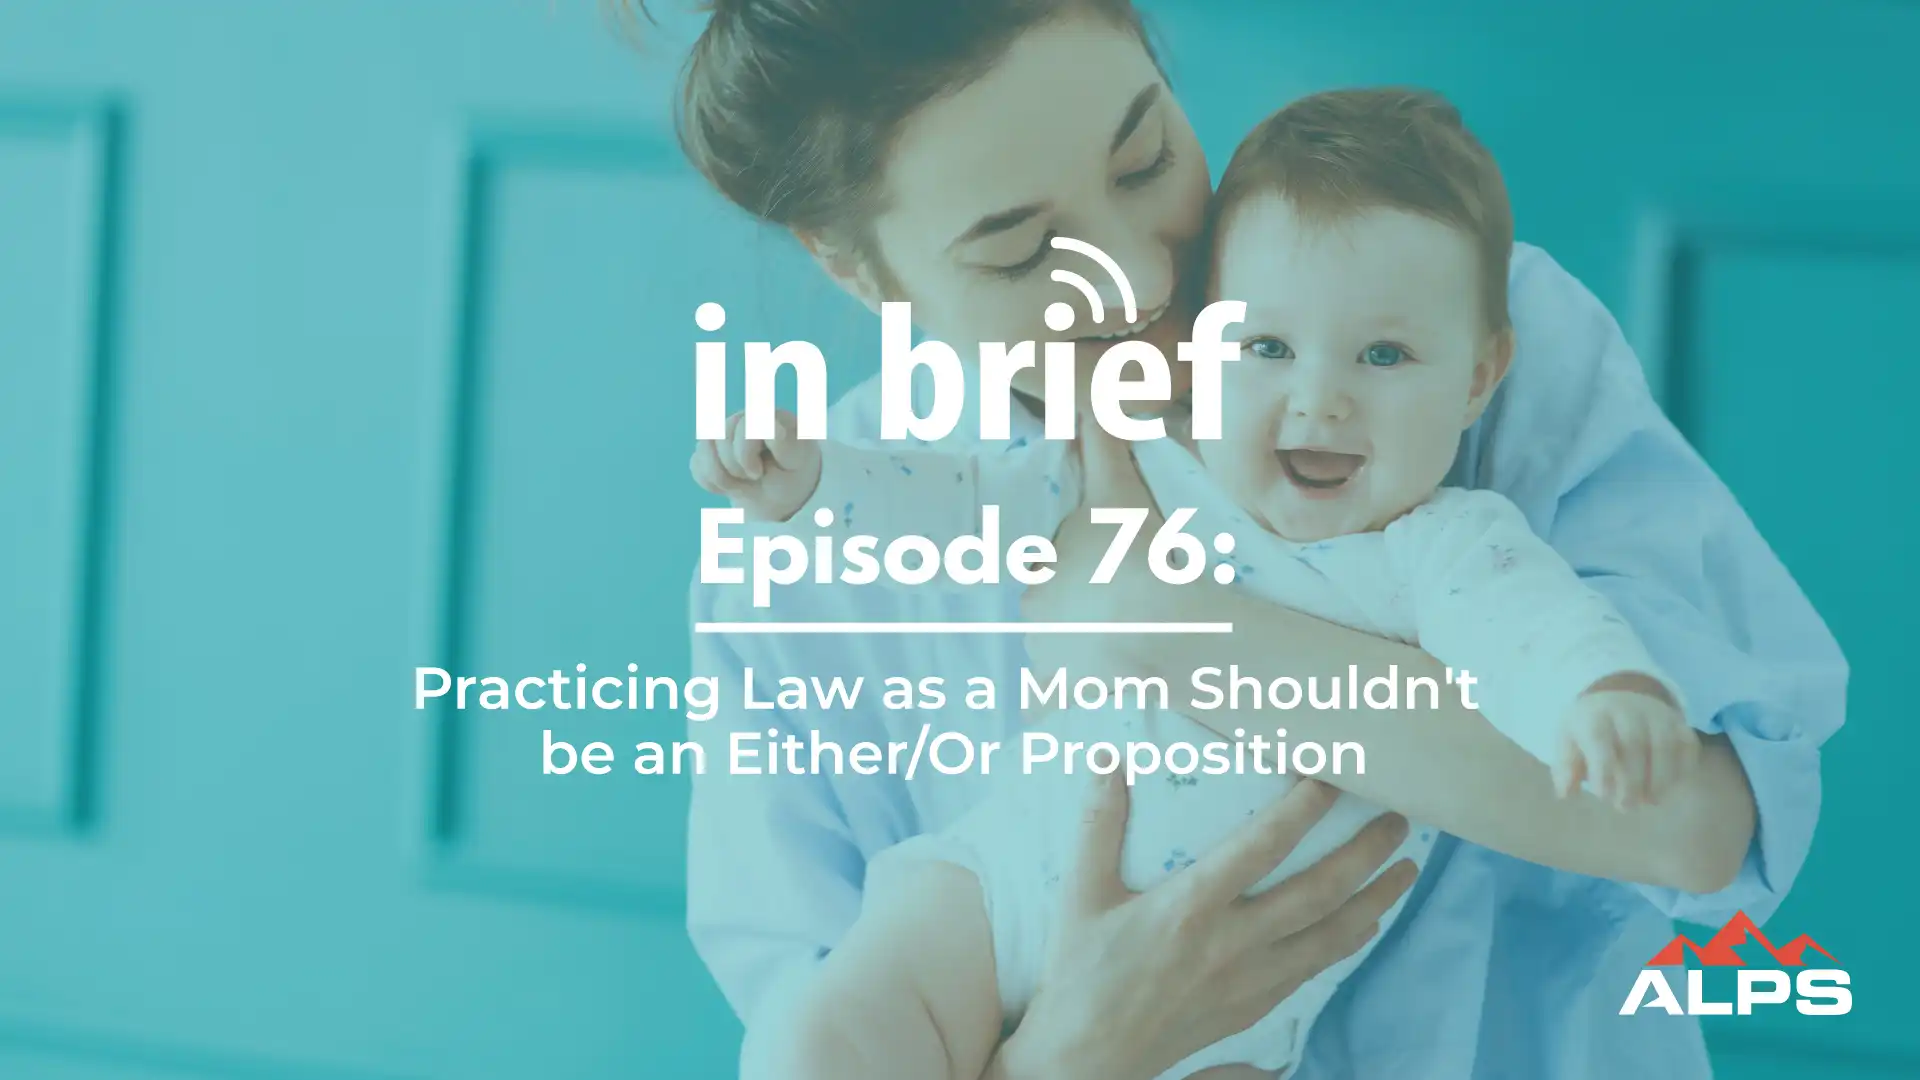 ALPS In Brief Podcast - Episode 76: Practicing Law as a Mom Shouldn’t Be an Either/Or Proposition